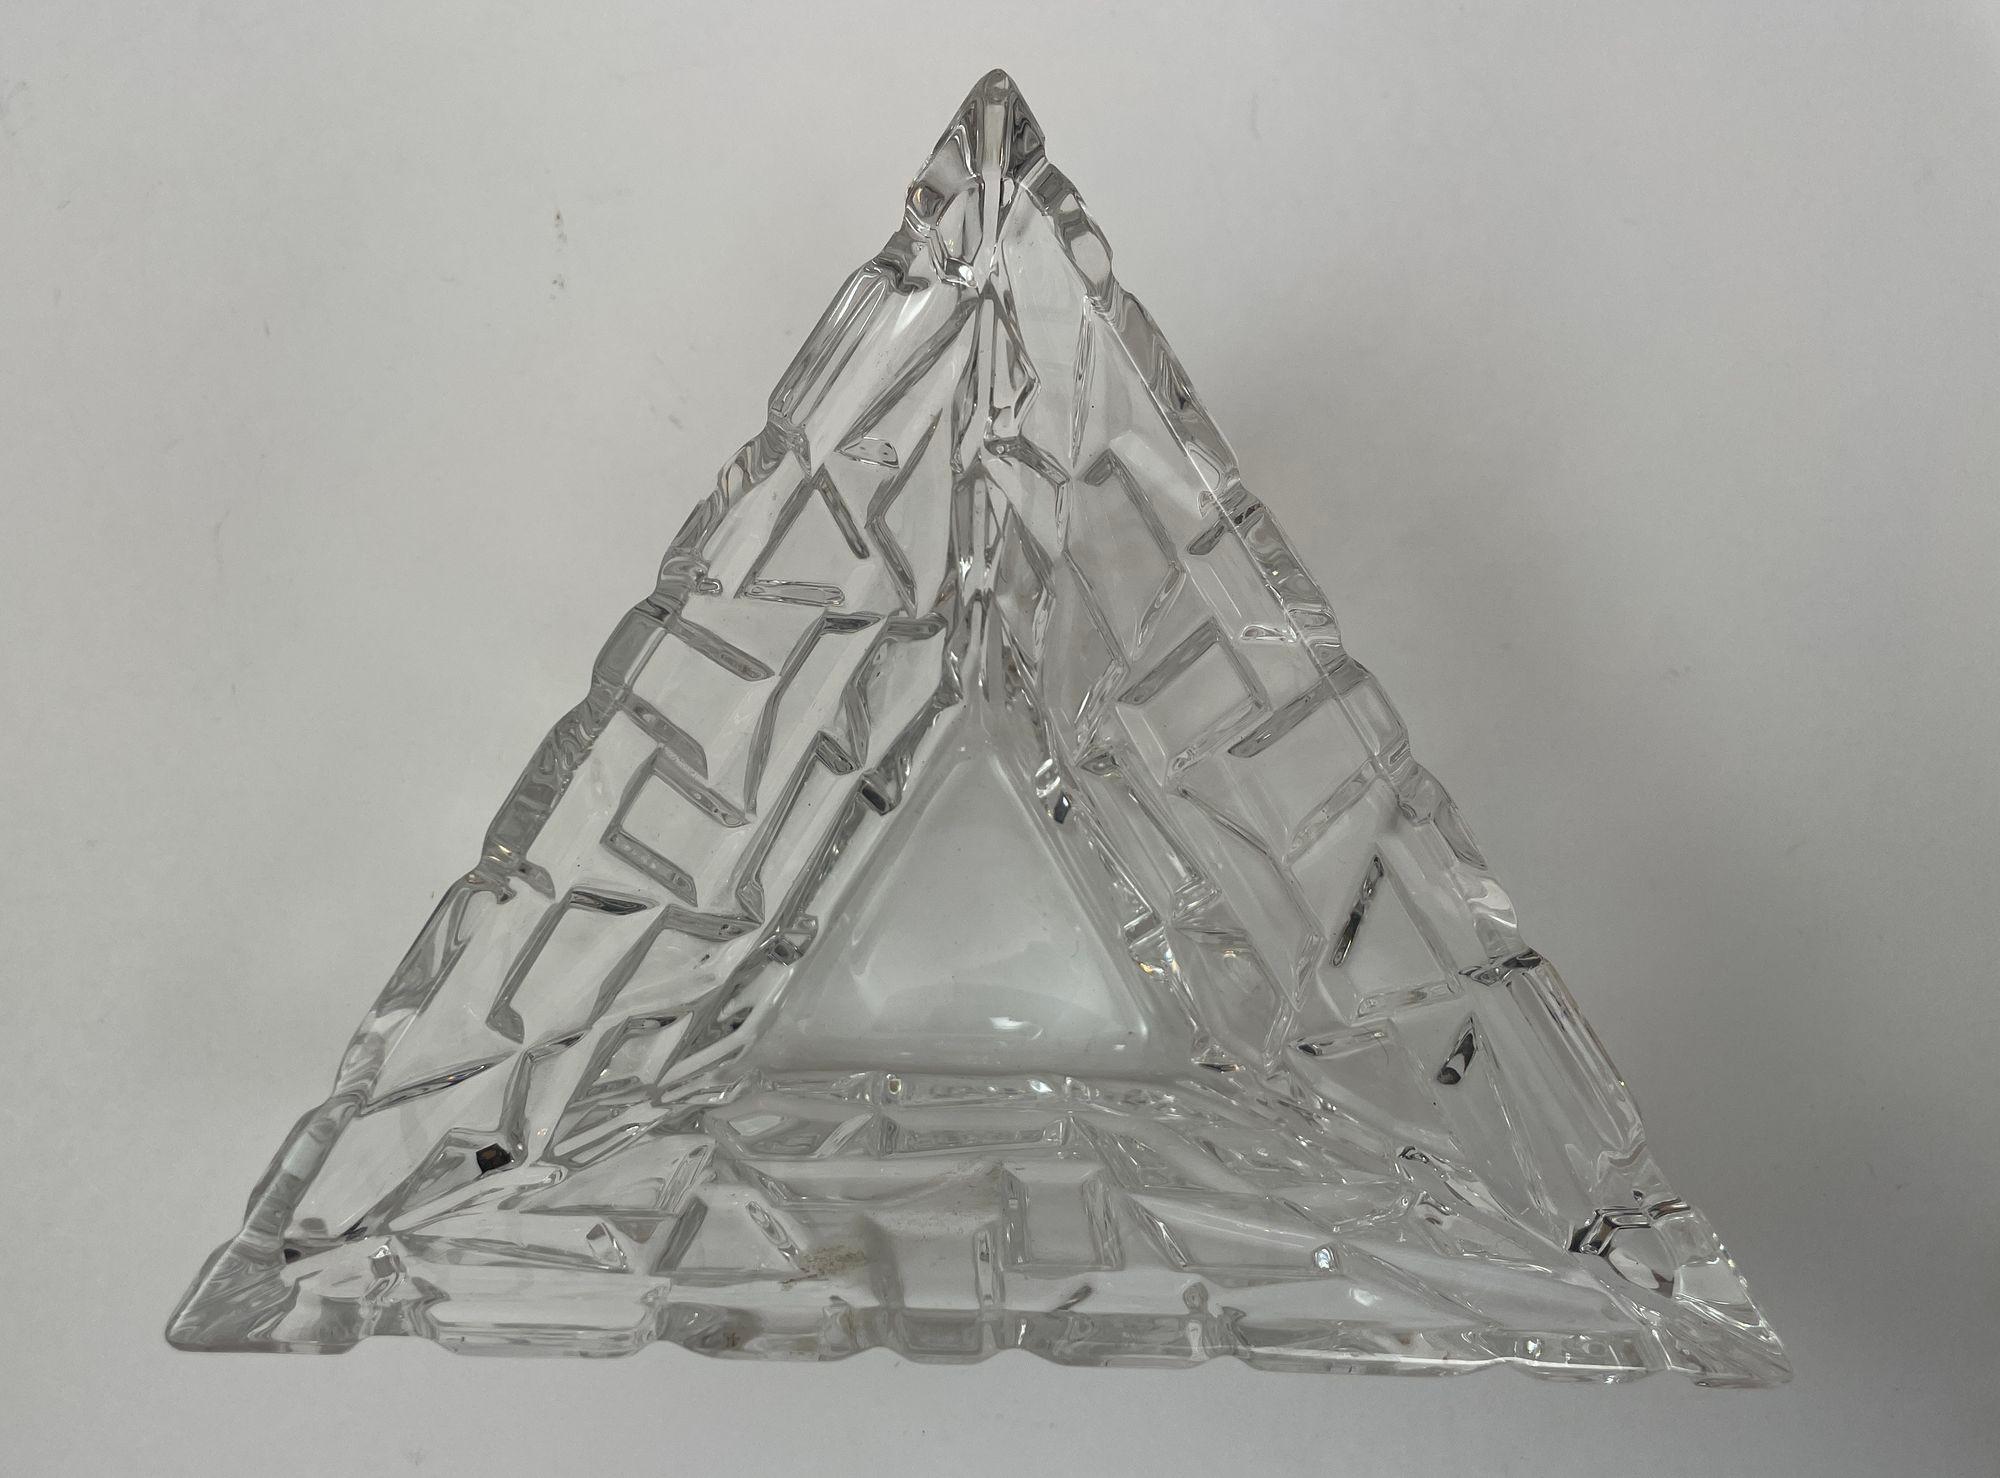 Tiffany & Co Sierra Triangular Clear Cut Crystal Bowl Ashtray.
This stunning Tiffany & Co. cut crystal candy dish is a must-have for any collector.
With its beautiful triangle shape and clear color, it is perfect for all occasions.
Tiffany & Co. in